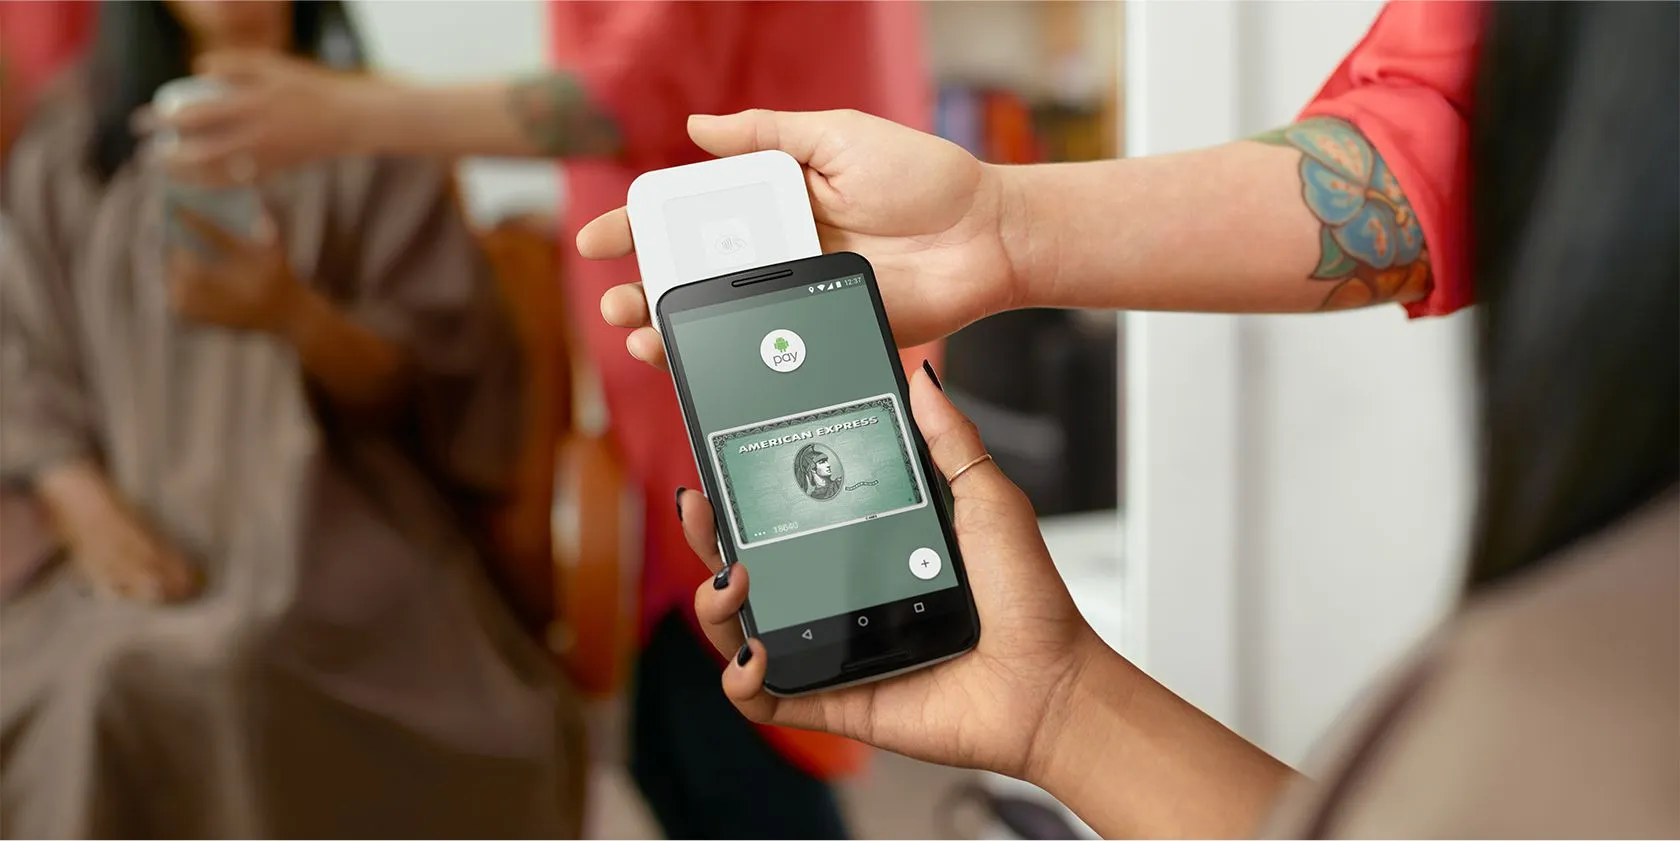 Android Pay (pictured) is another type of mobile NFC payment